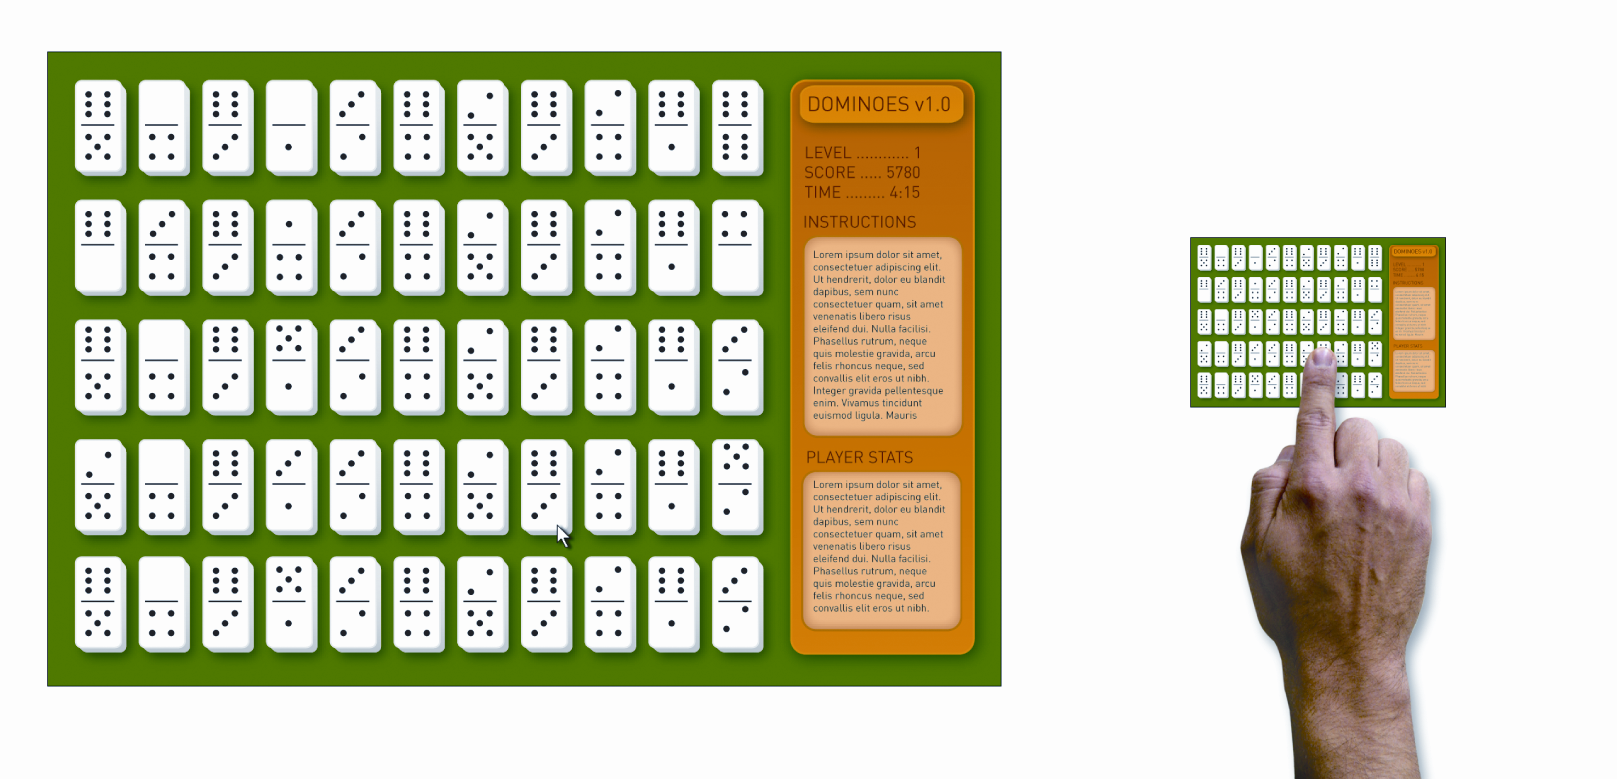 Figure 1. On a 20-inch PC monitor (left), the user can easily identify and select a domino using the arrow cursor. When the domino images are scaled to fit on a five-inch UMPC screen (right), however, it becomes very difficult for users to select individual dominoes, or even to identify how many dots are on each domino.